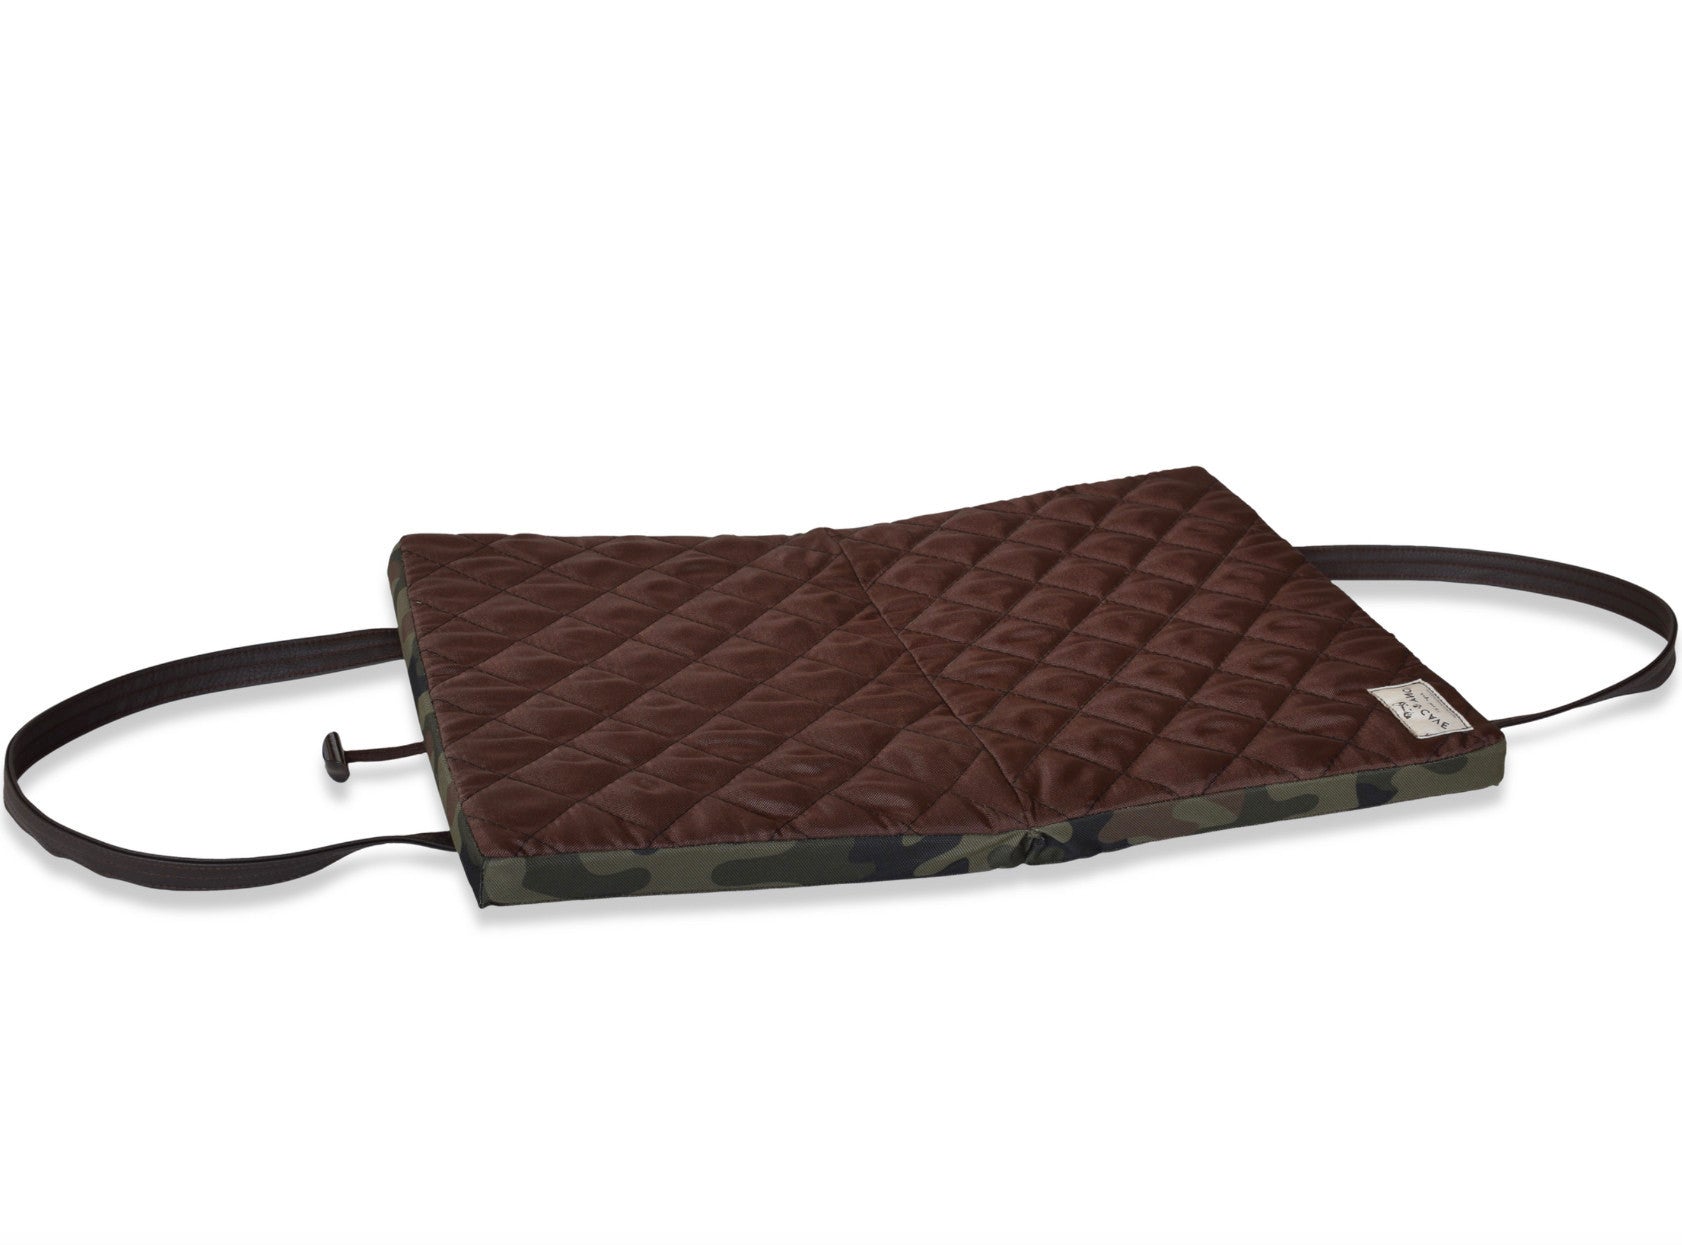 KONA Cave® Travel Dog Bed.  Thick and padded folded dog mat with carrying straps. Cot. hundedecke zum mitnehmen.